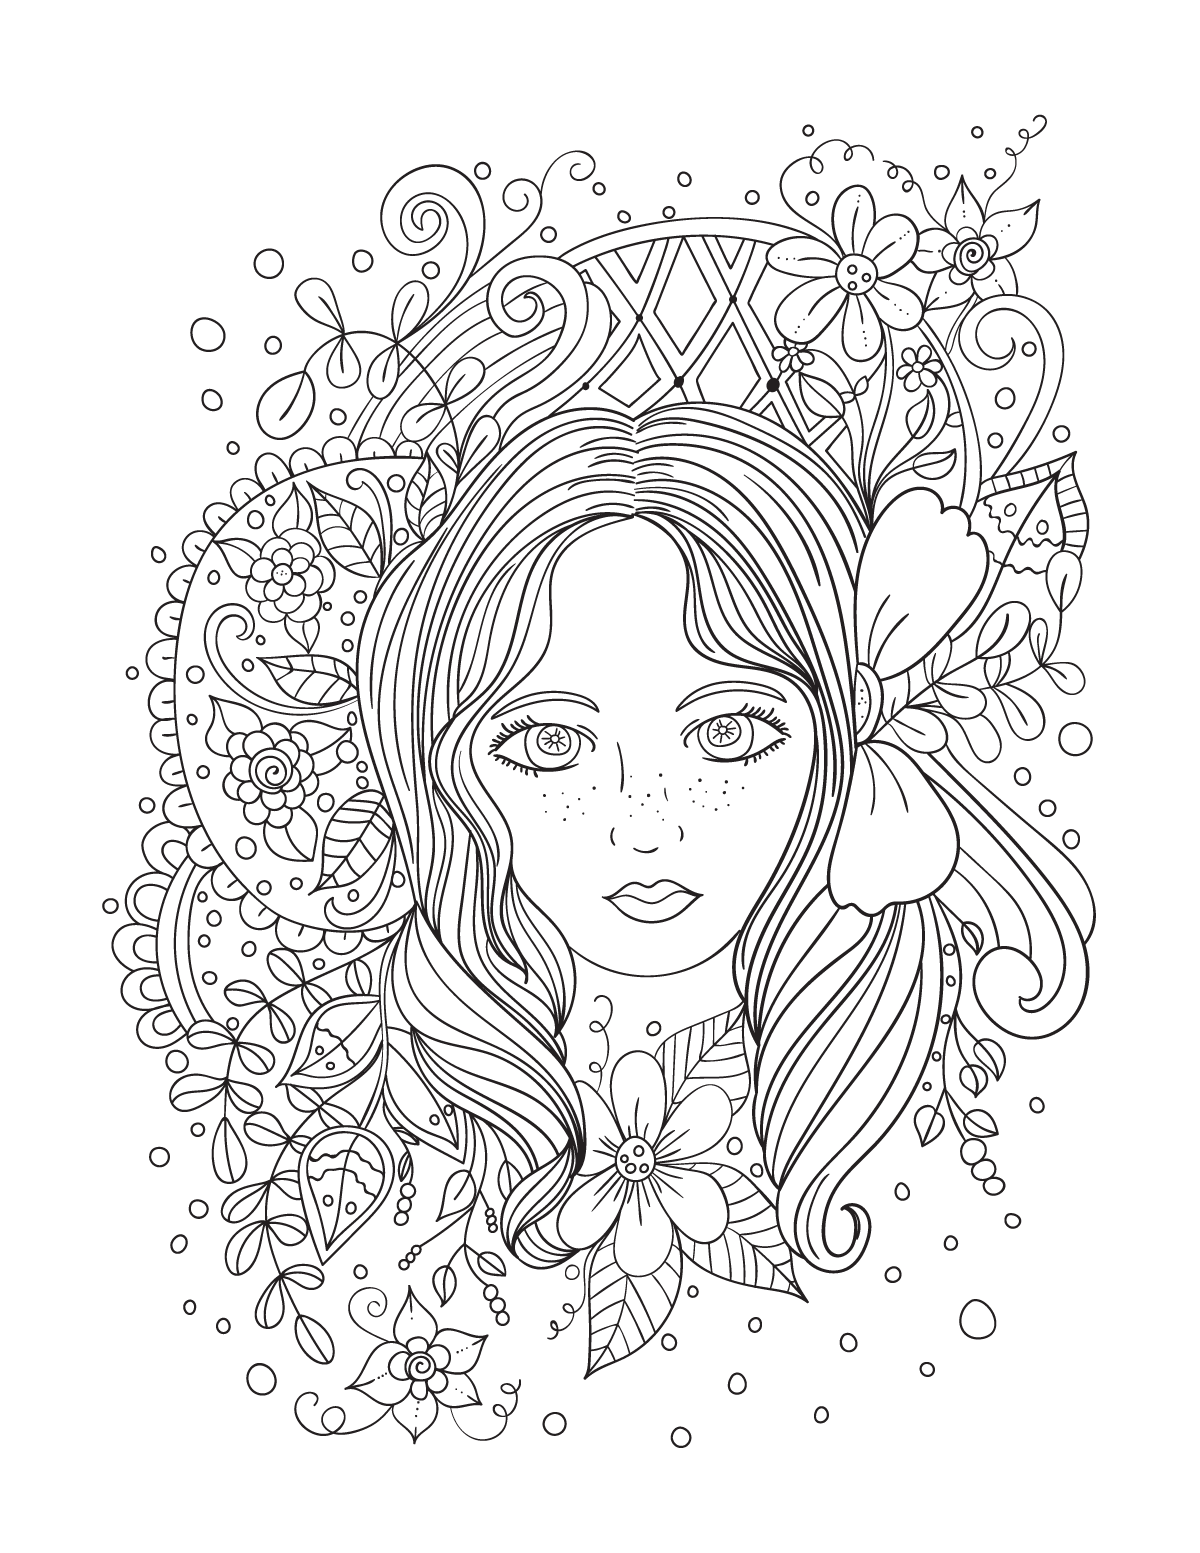 Digital Coloring Book Pages Girls And Flowers Vol 1 By Erikavectorika Thehungryjpeg Com